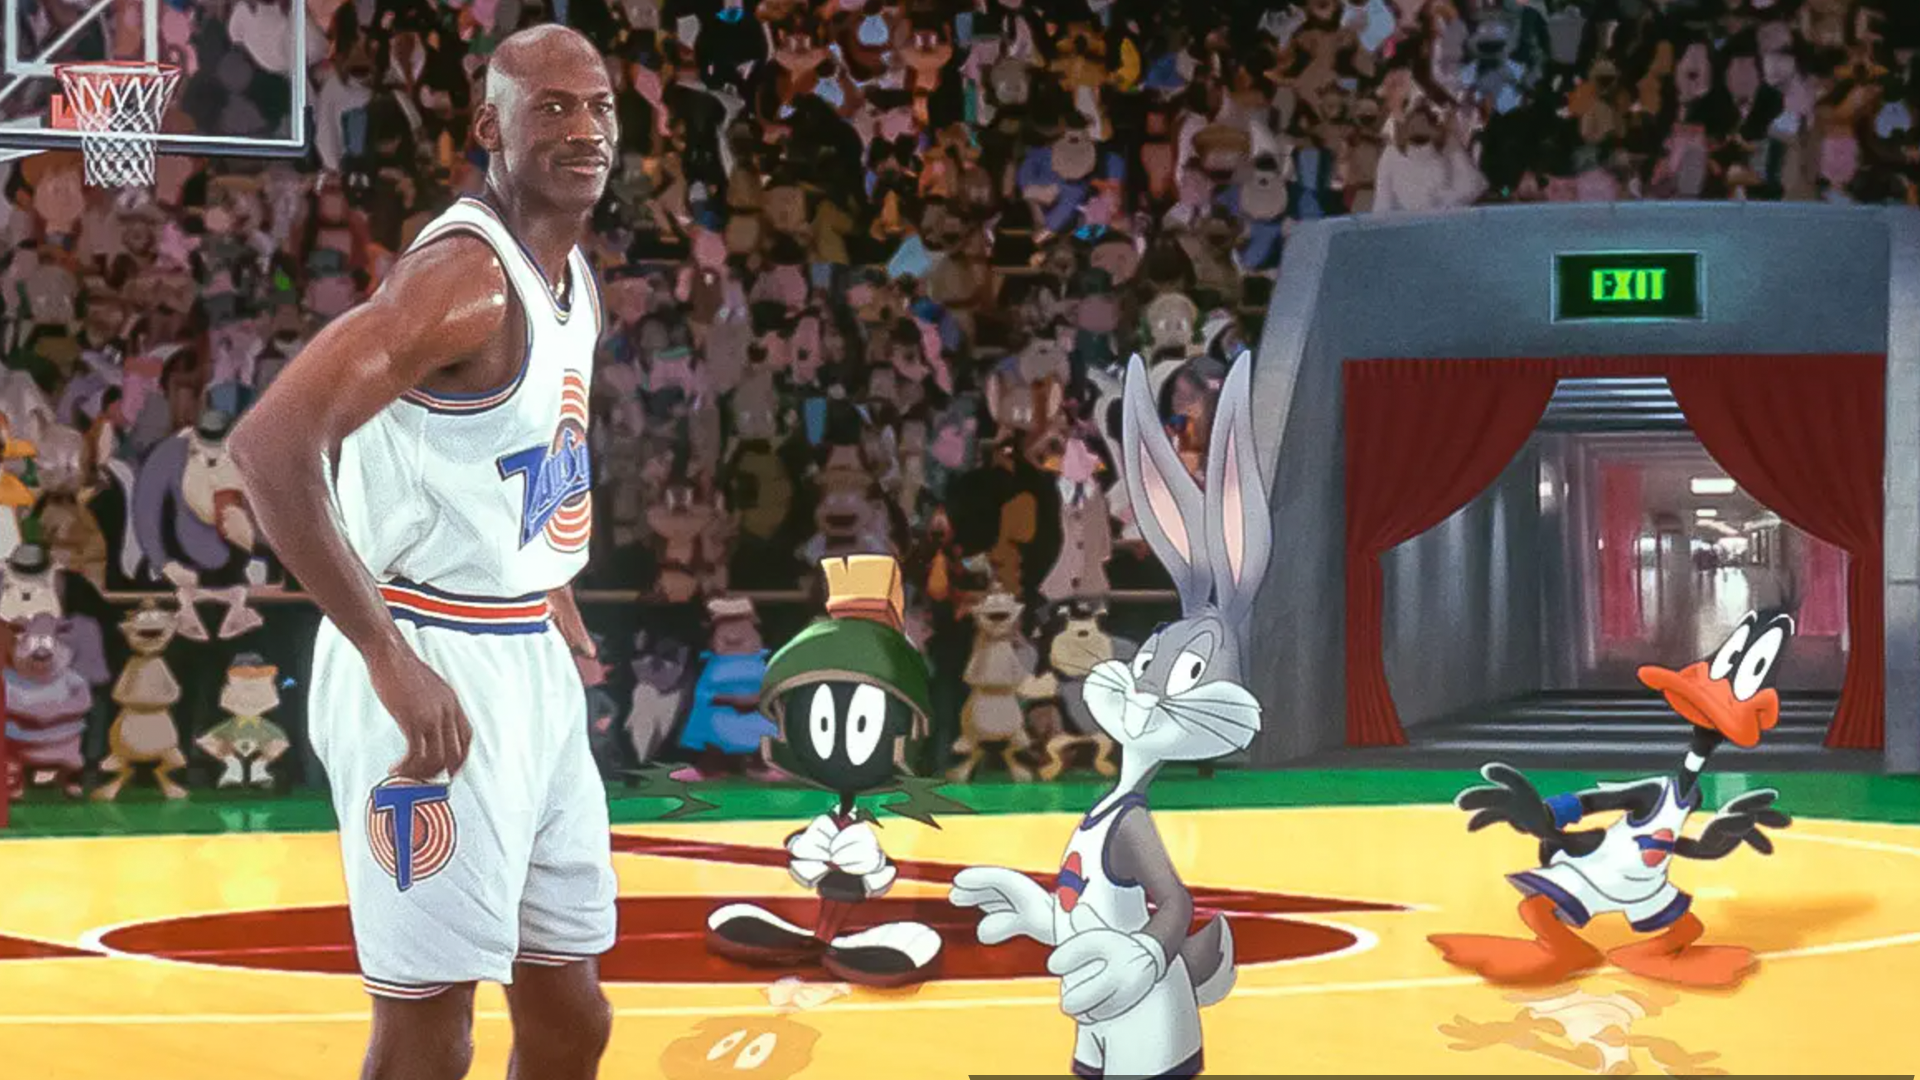 Michael Jordan, Bugs Bunny, Marvin the Martian and Daffy Duck on the basketball court